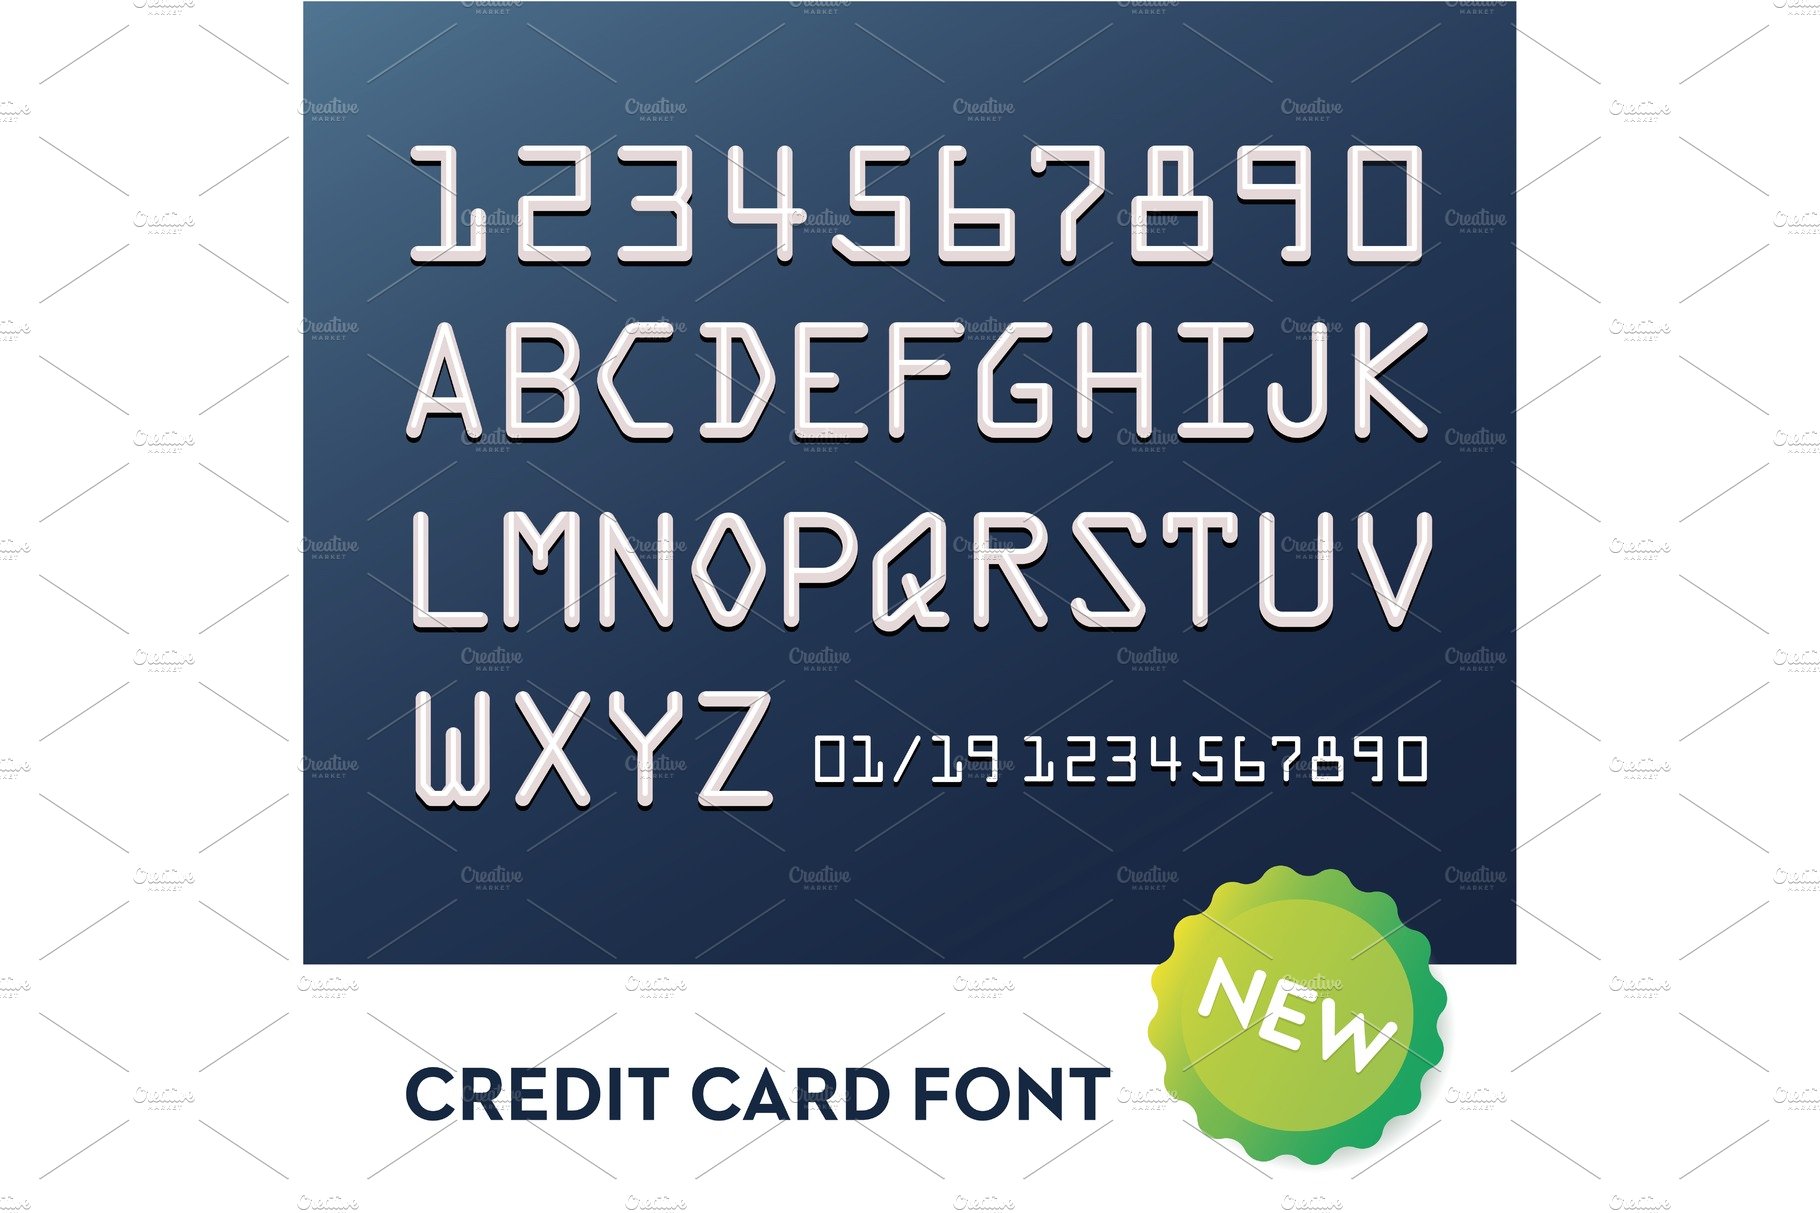 Font for credit cards cover image.